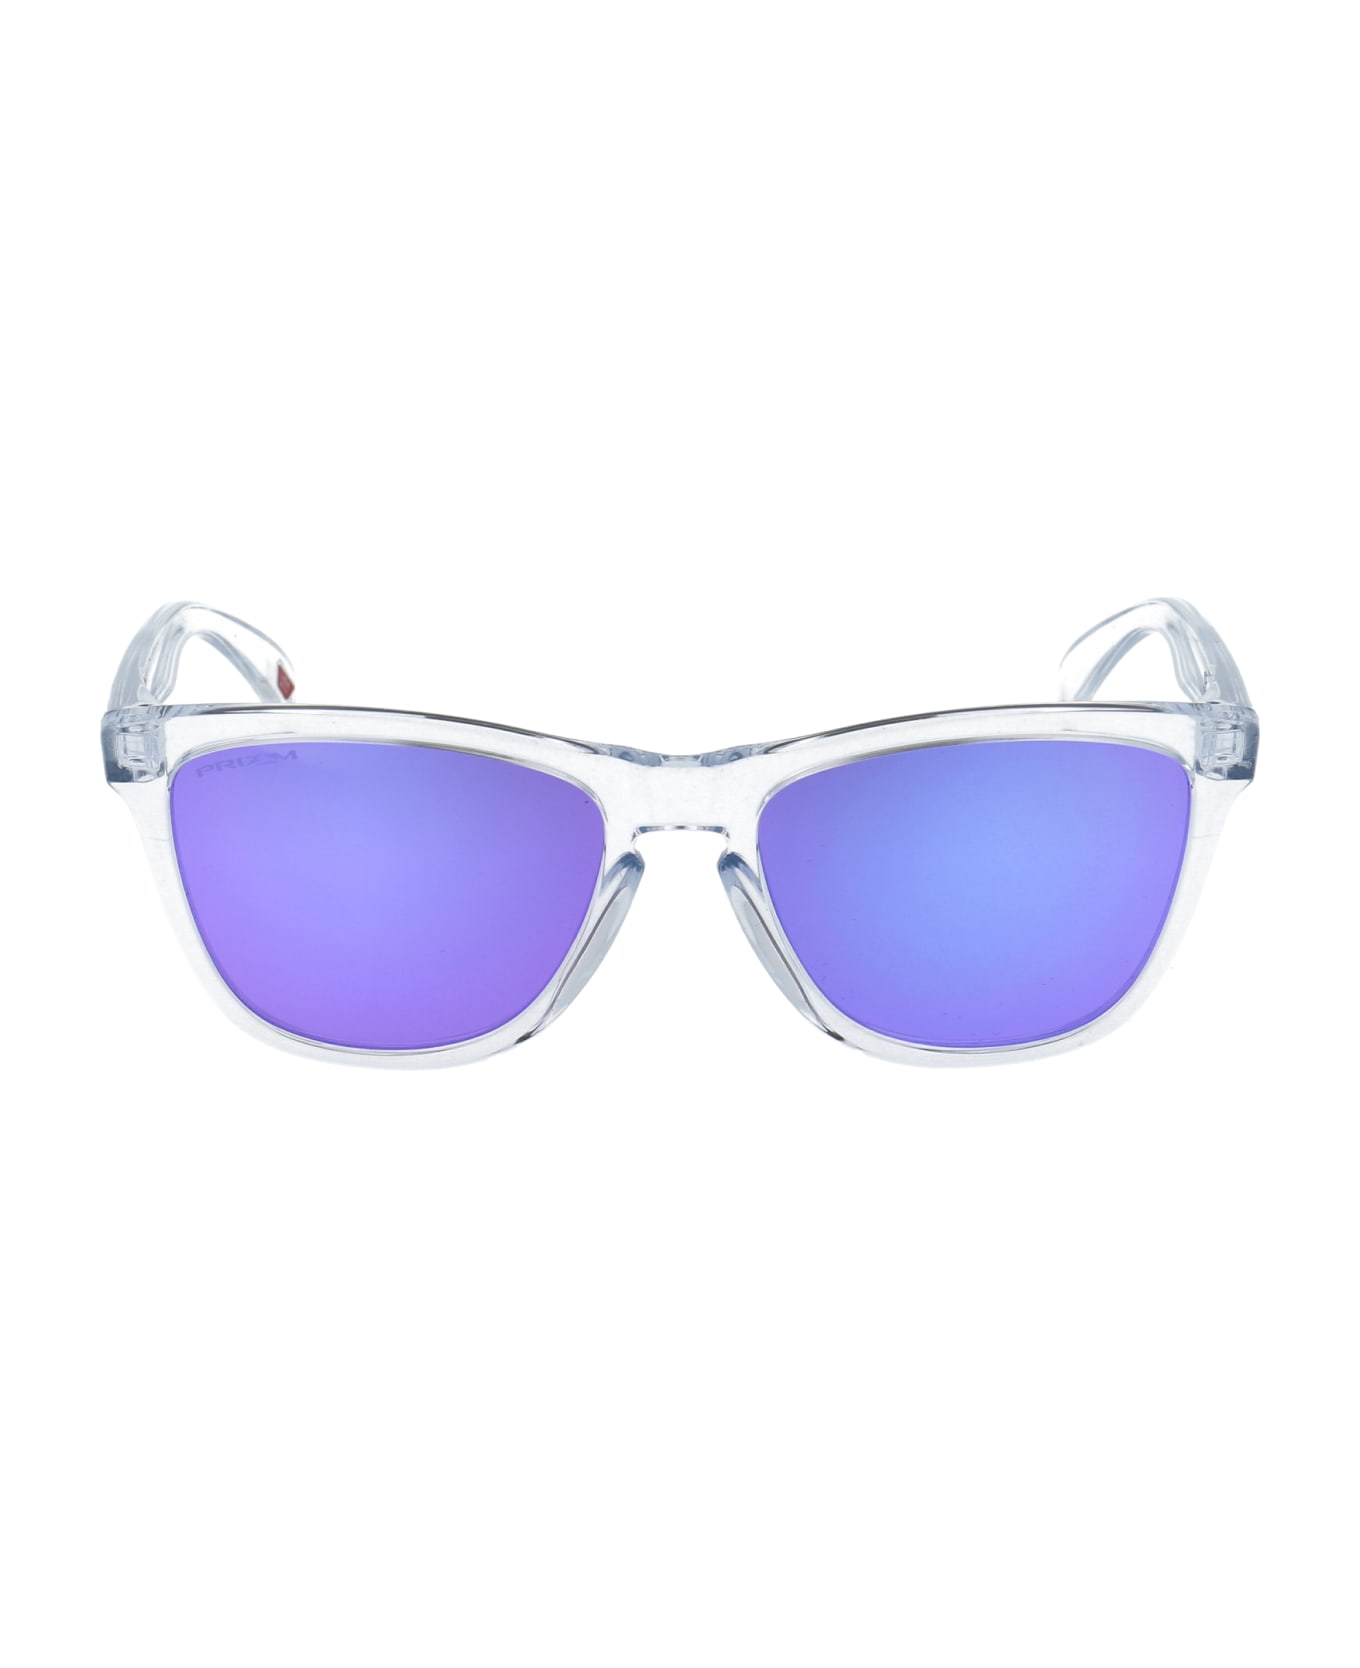 Oakley Frogskins Sunglasses - 9013H7 POLISHED CLEAR サングラス